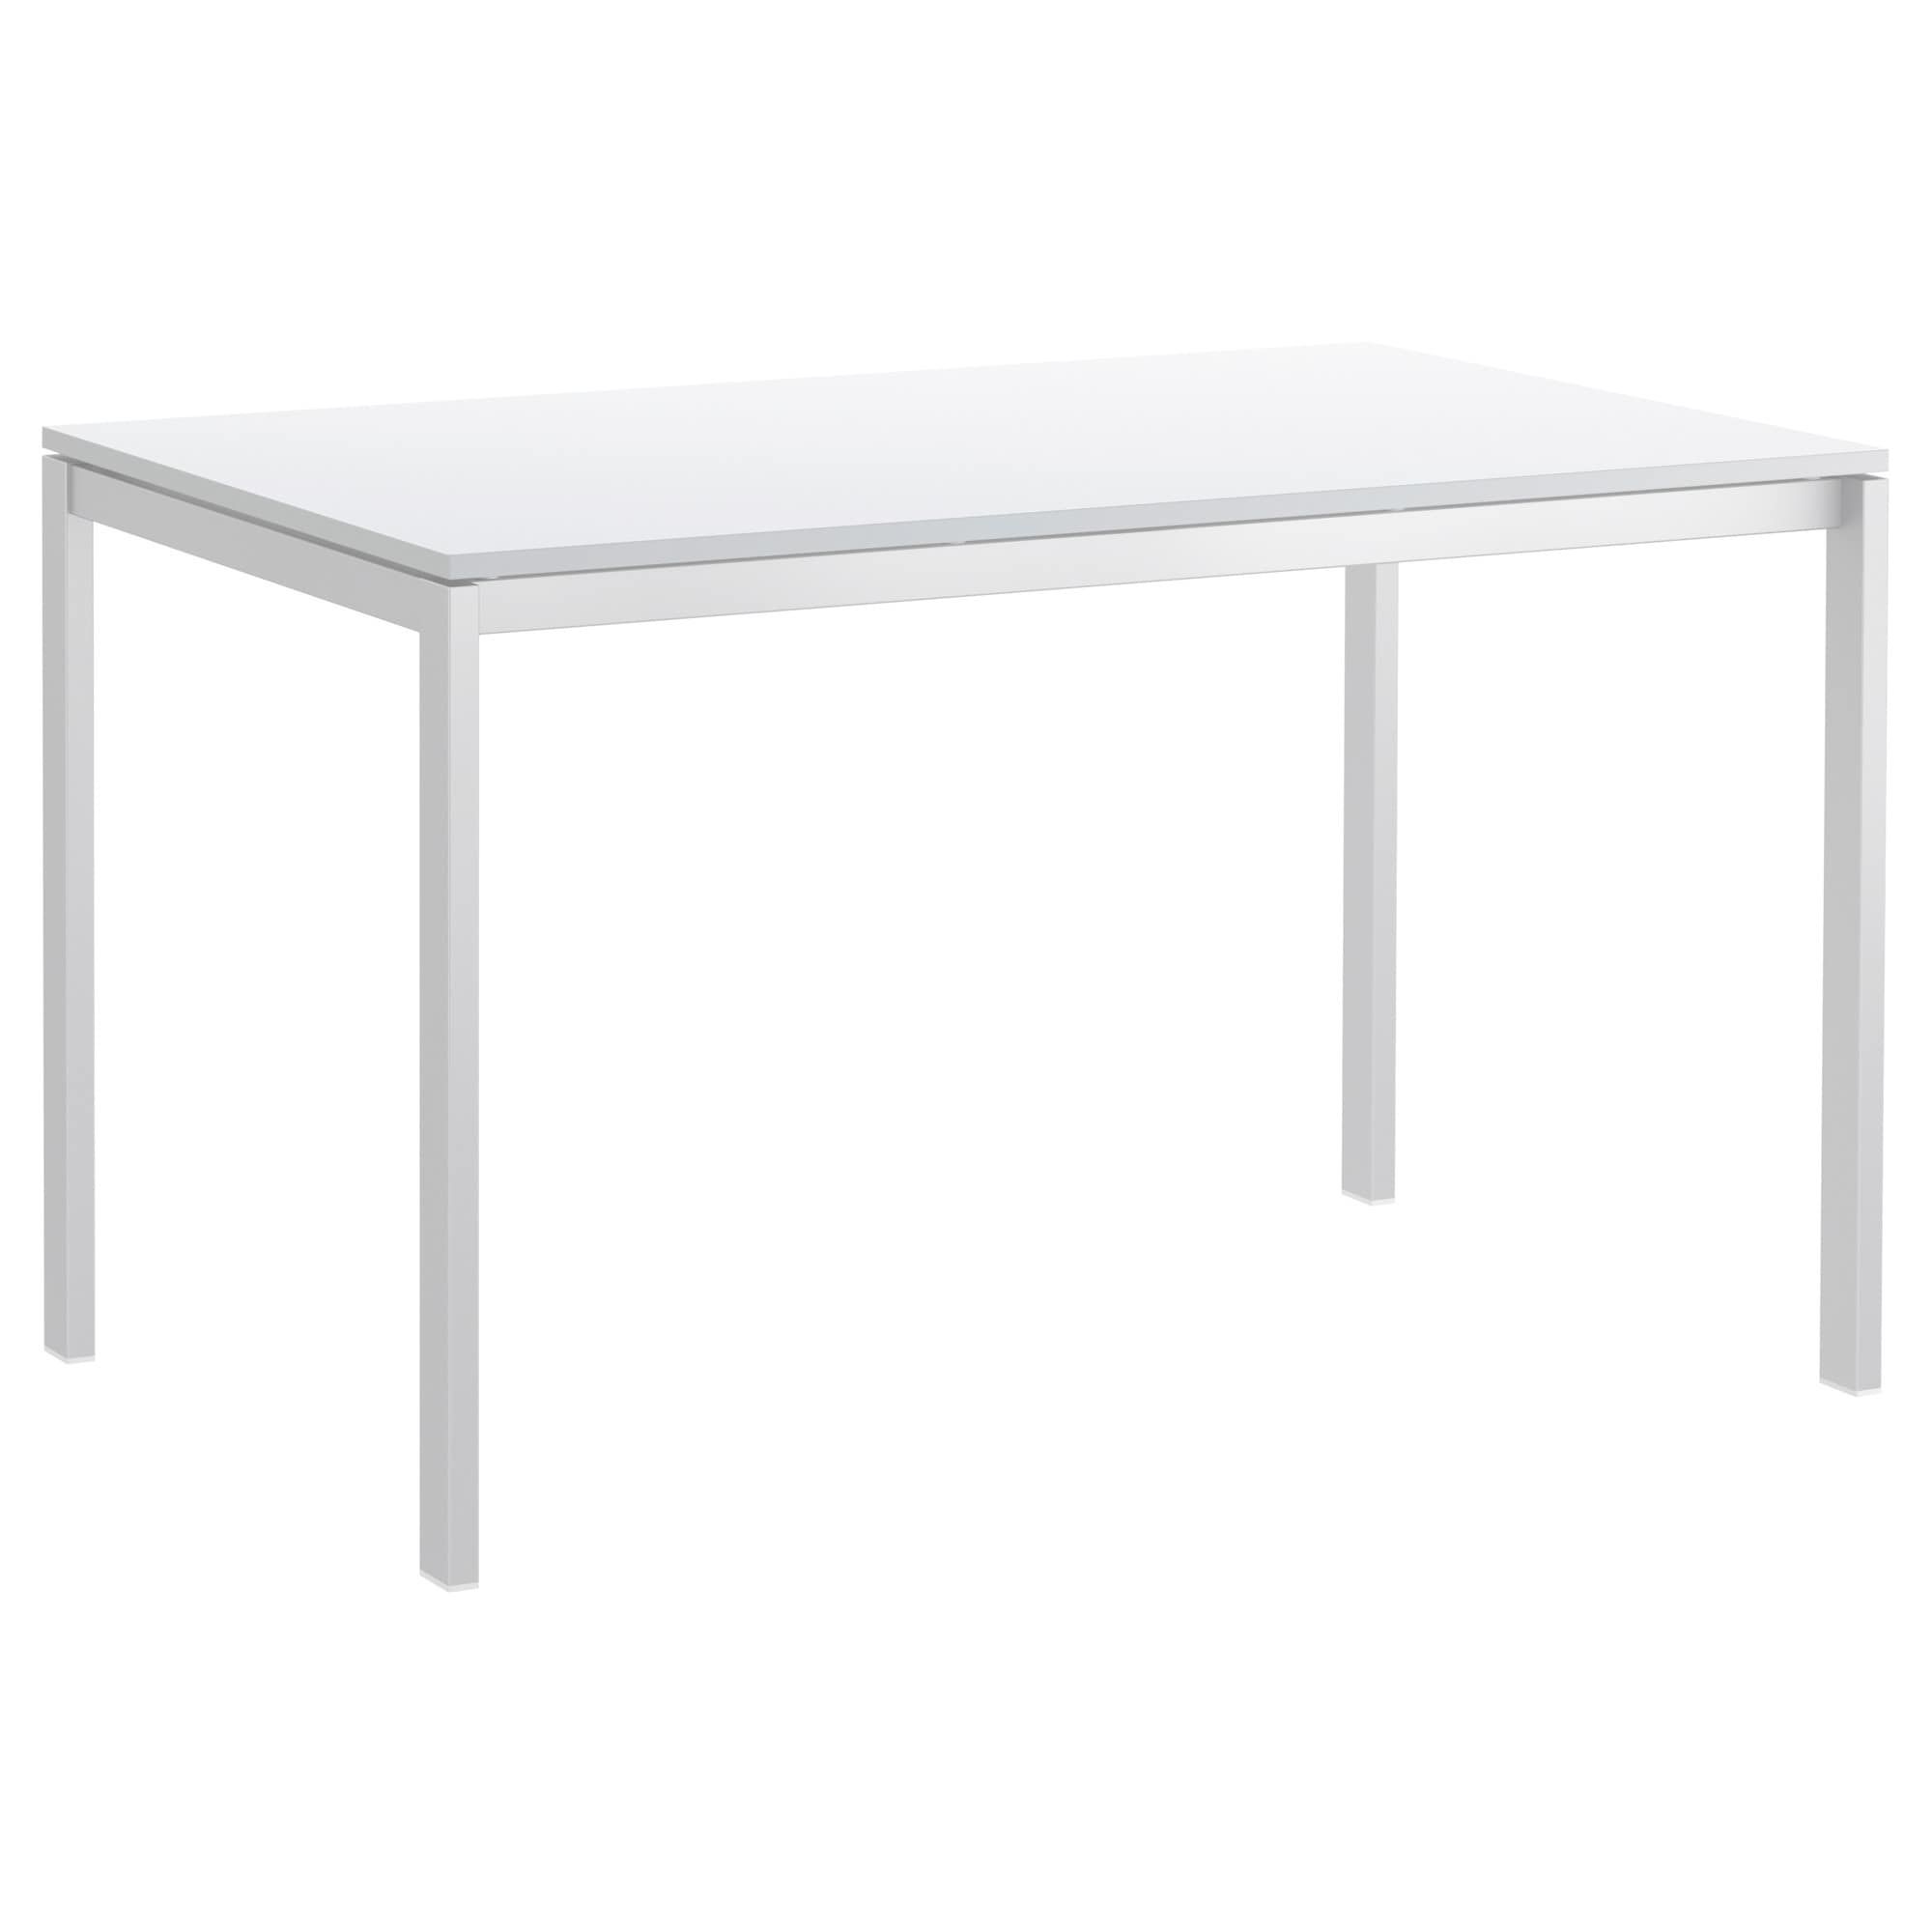 White Melamine Dining Tables Throughout Most Recently Released Melltorp Table White 125 X 75 Cm – Ikea (View 17 of 25)